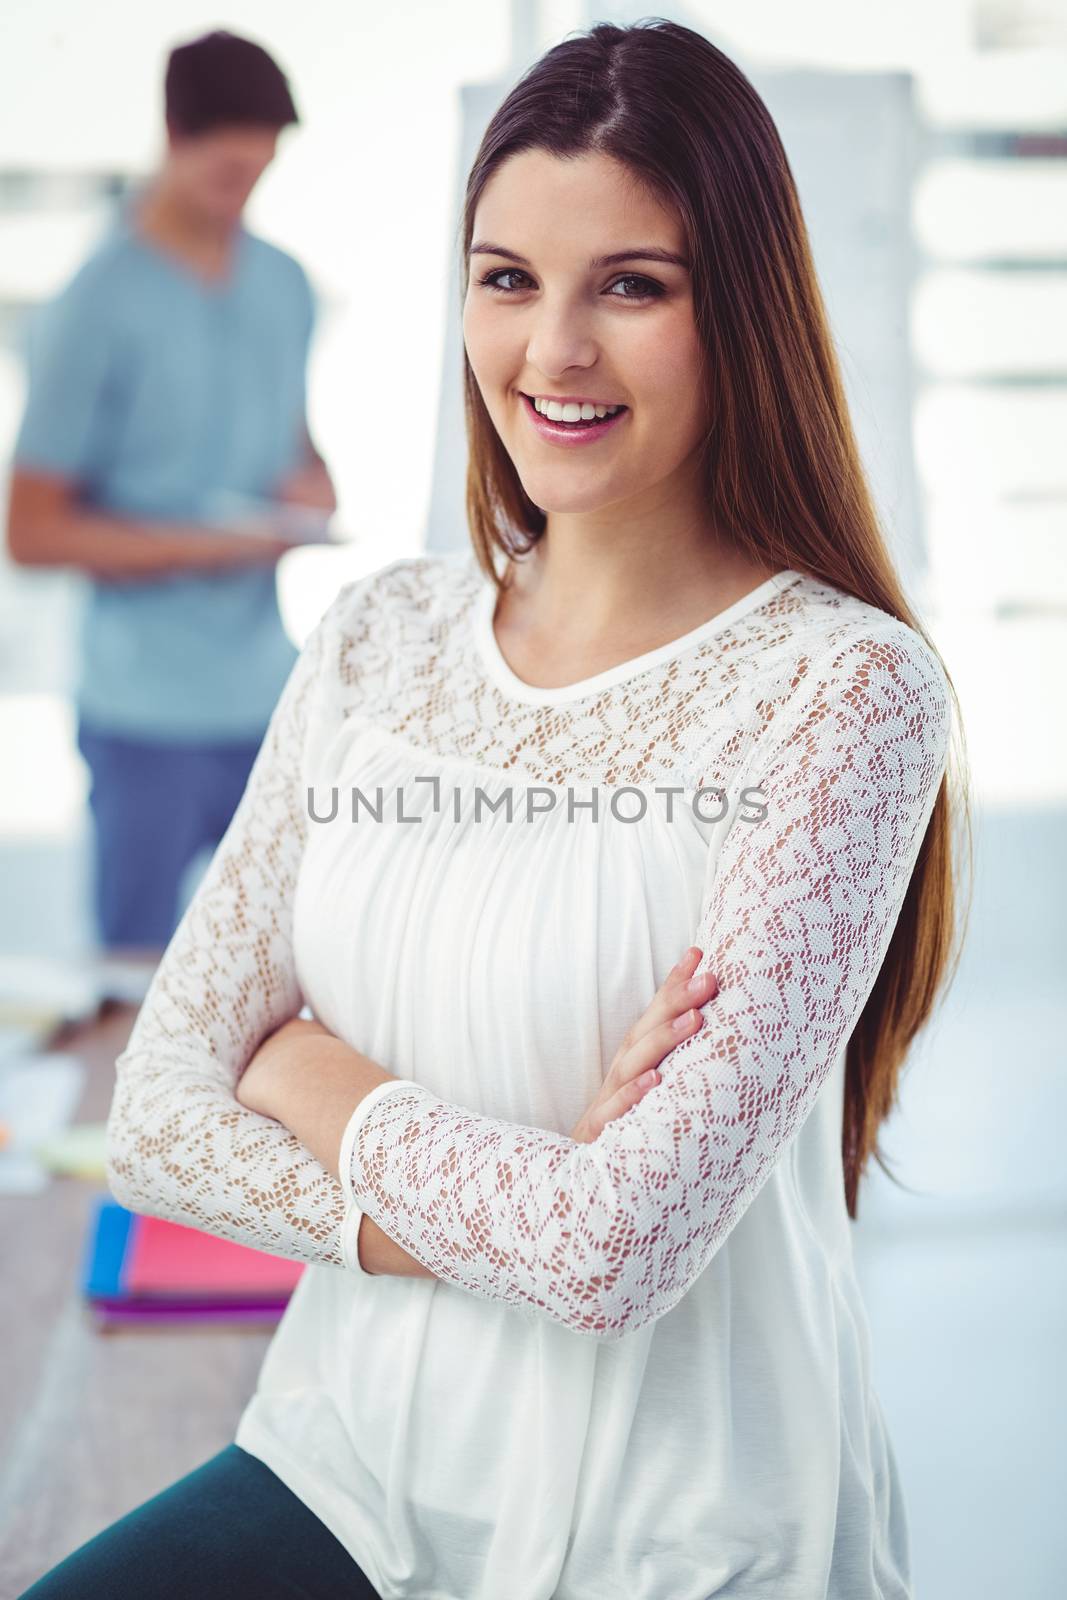 Young creative worker smiling at camera by Wavebreakmedia